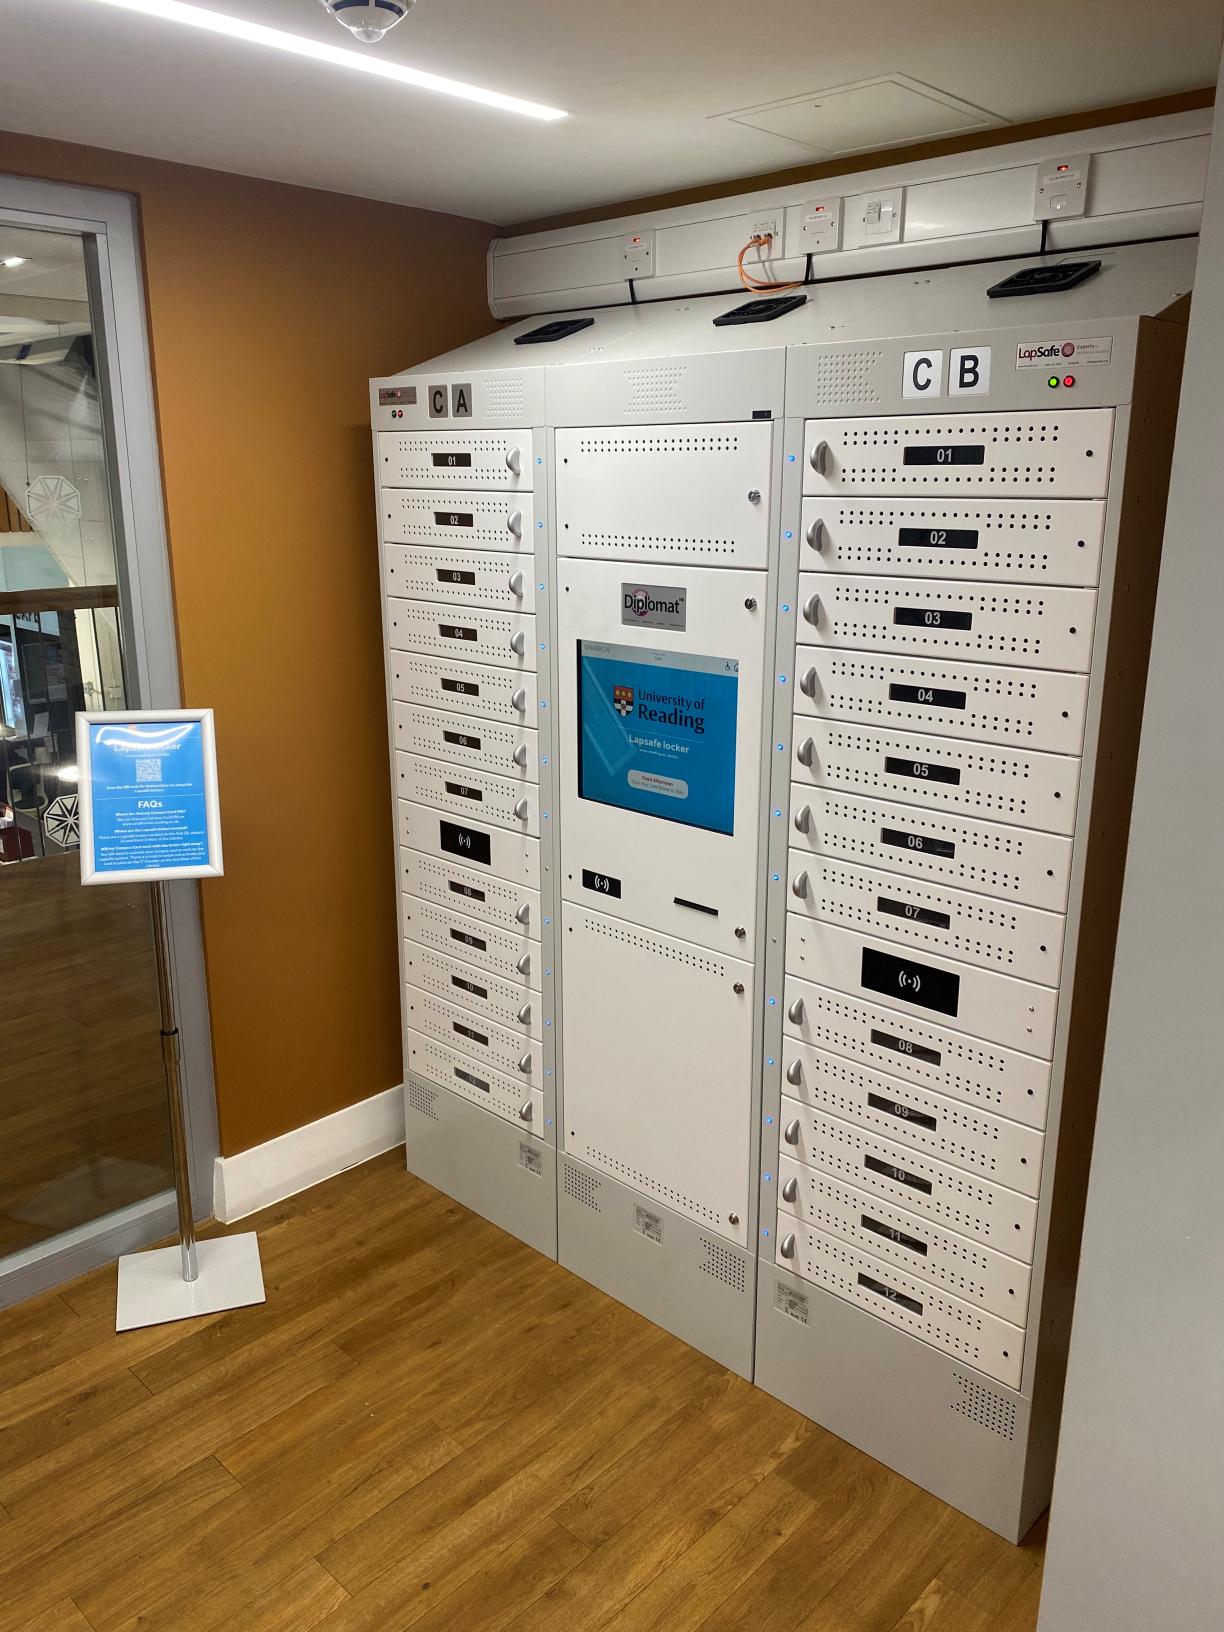 Lapsafe lockers in the library